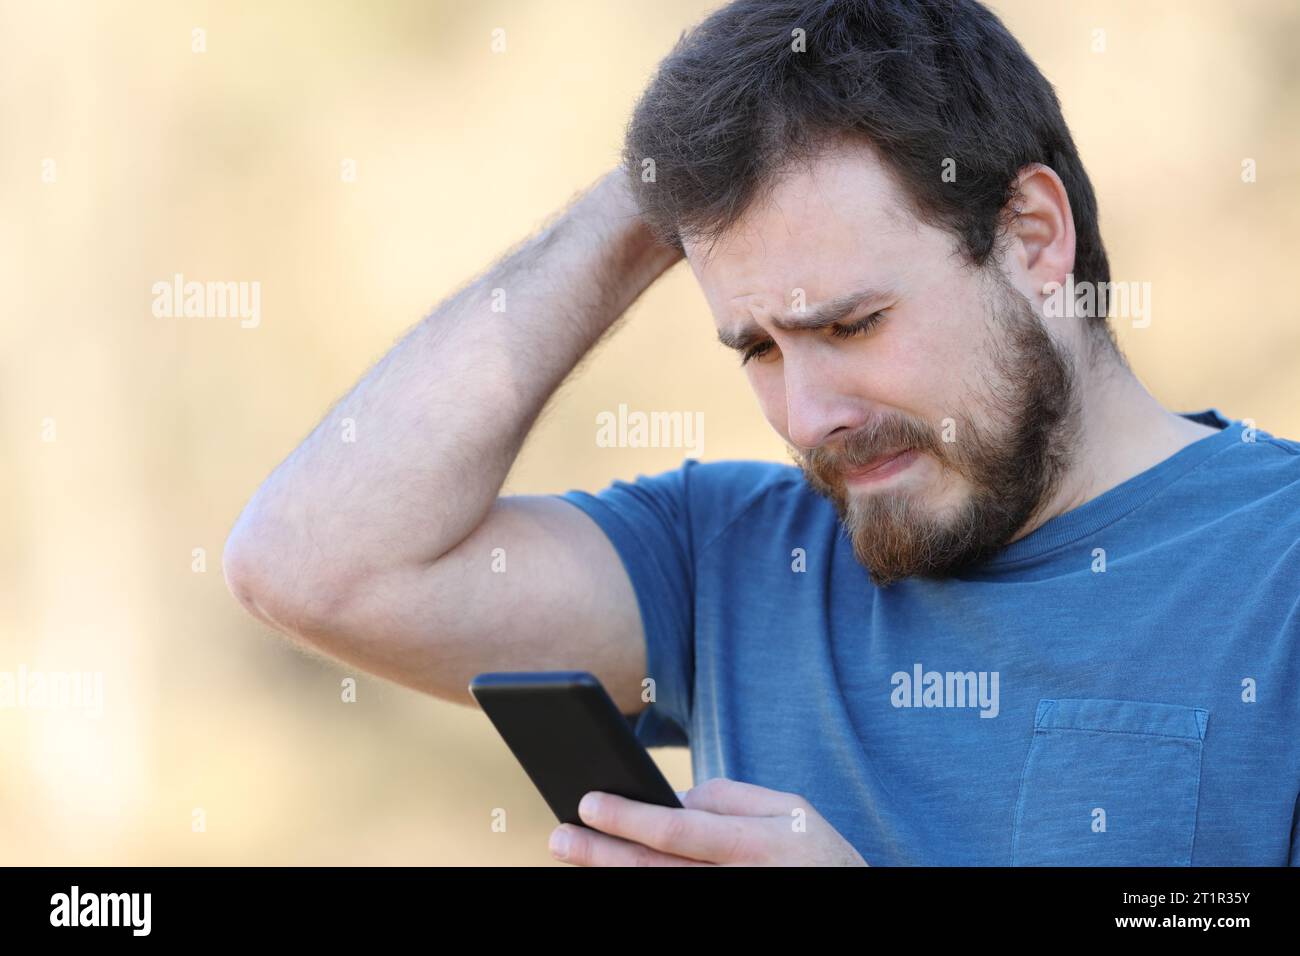 Sad man checking smart phone bad content standing outdoors Stock Photo